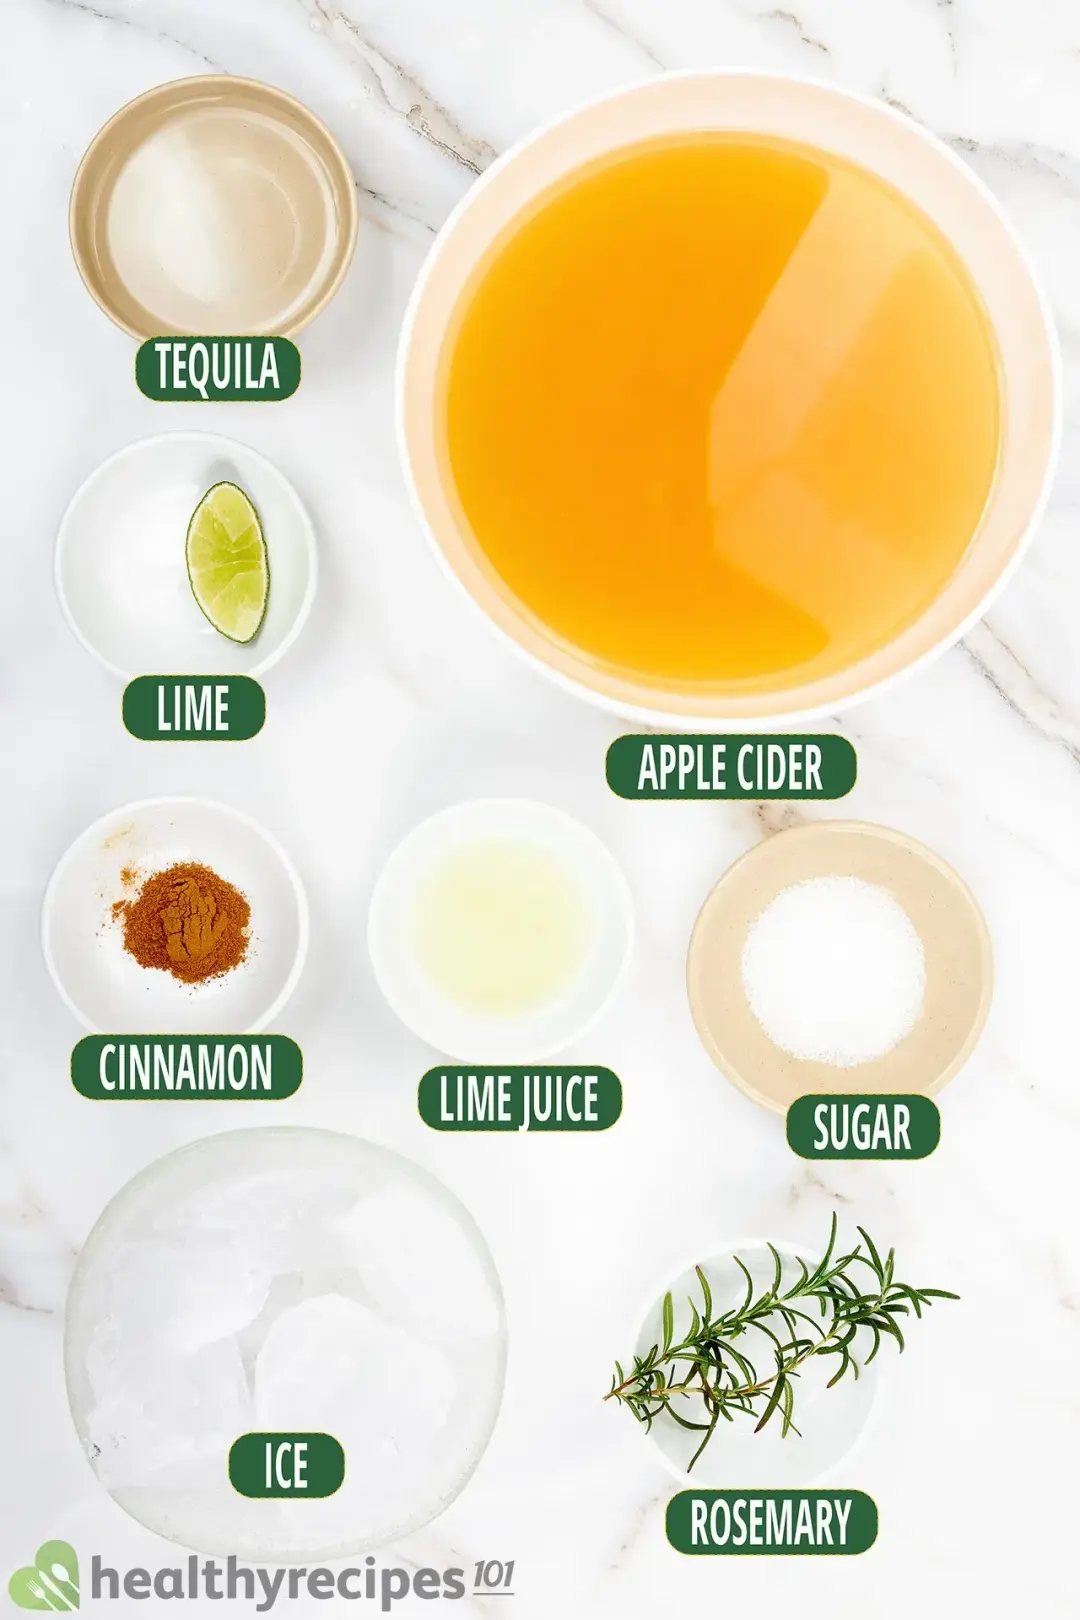 Ingredients in separate bowls: apple cider, ice, sugar, lime juice, rosemary sprigs, and sugar